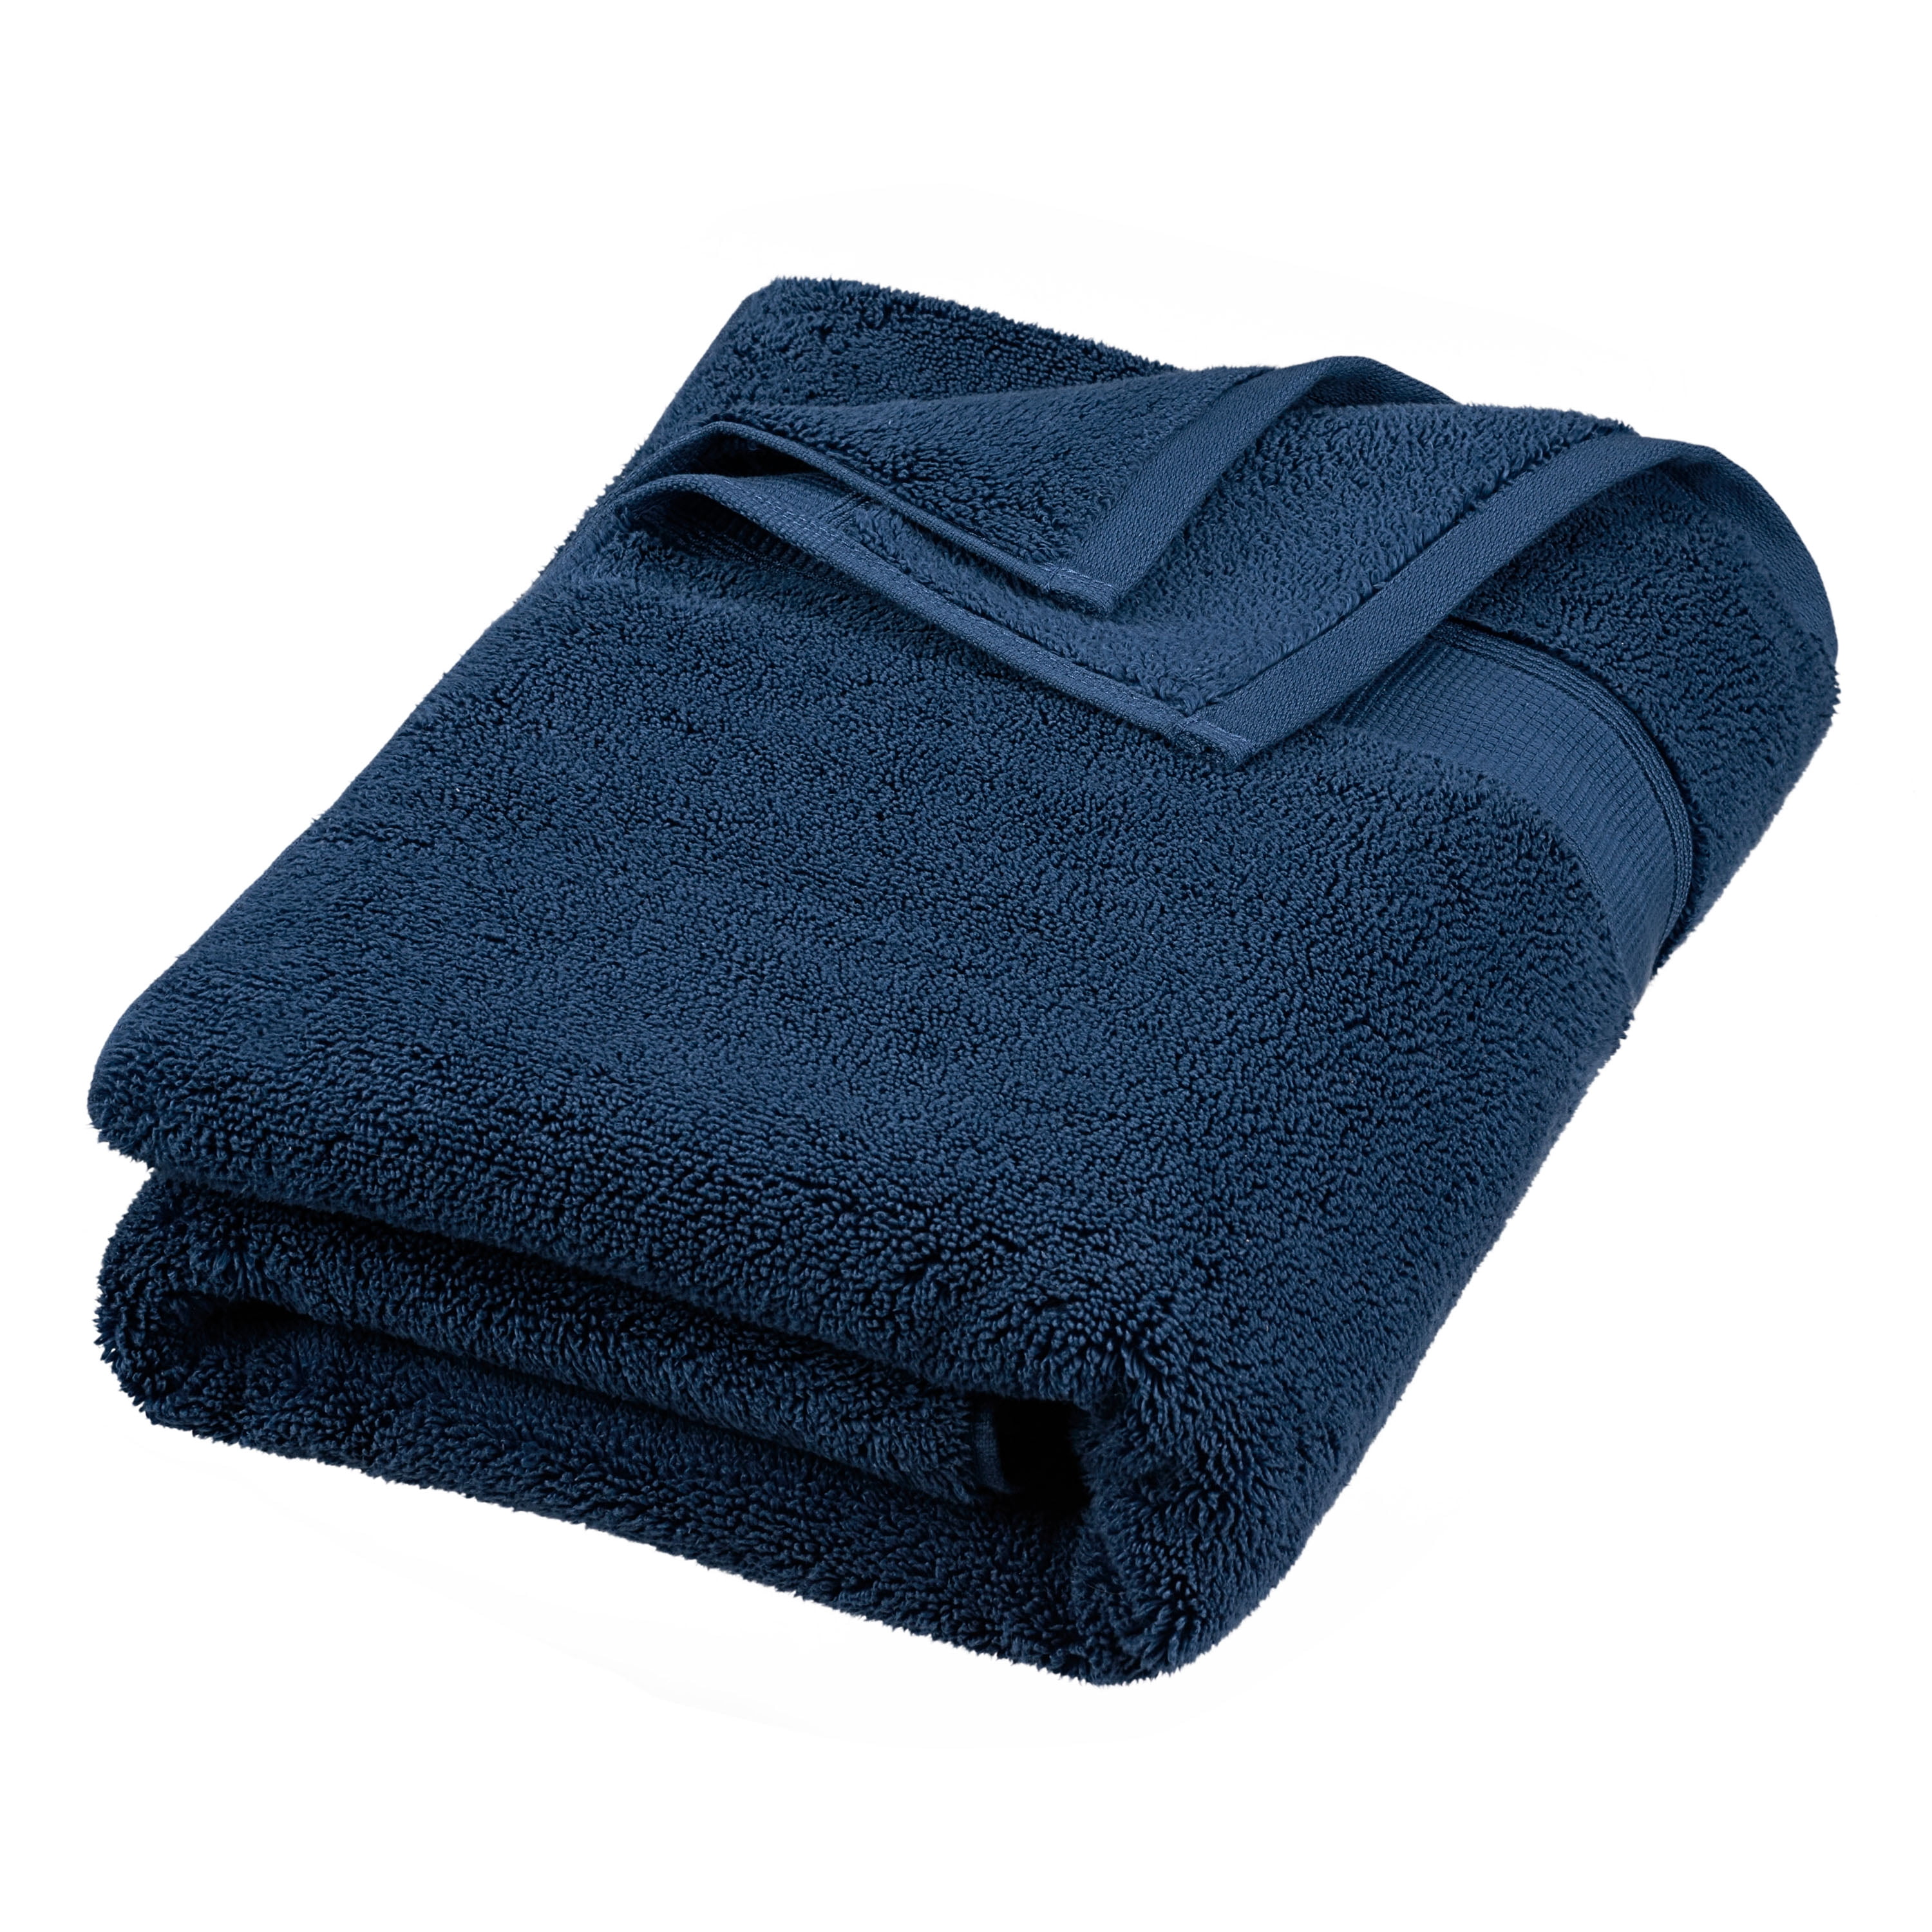 Bumble Luxury Thick Bath Towels / 30? x 60? Premium Bath Sheet/Ultra Soft, Highly Absorbent 800 GSM Heavy Weight Combed Cotton (Navy, 4 Pack), Blue